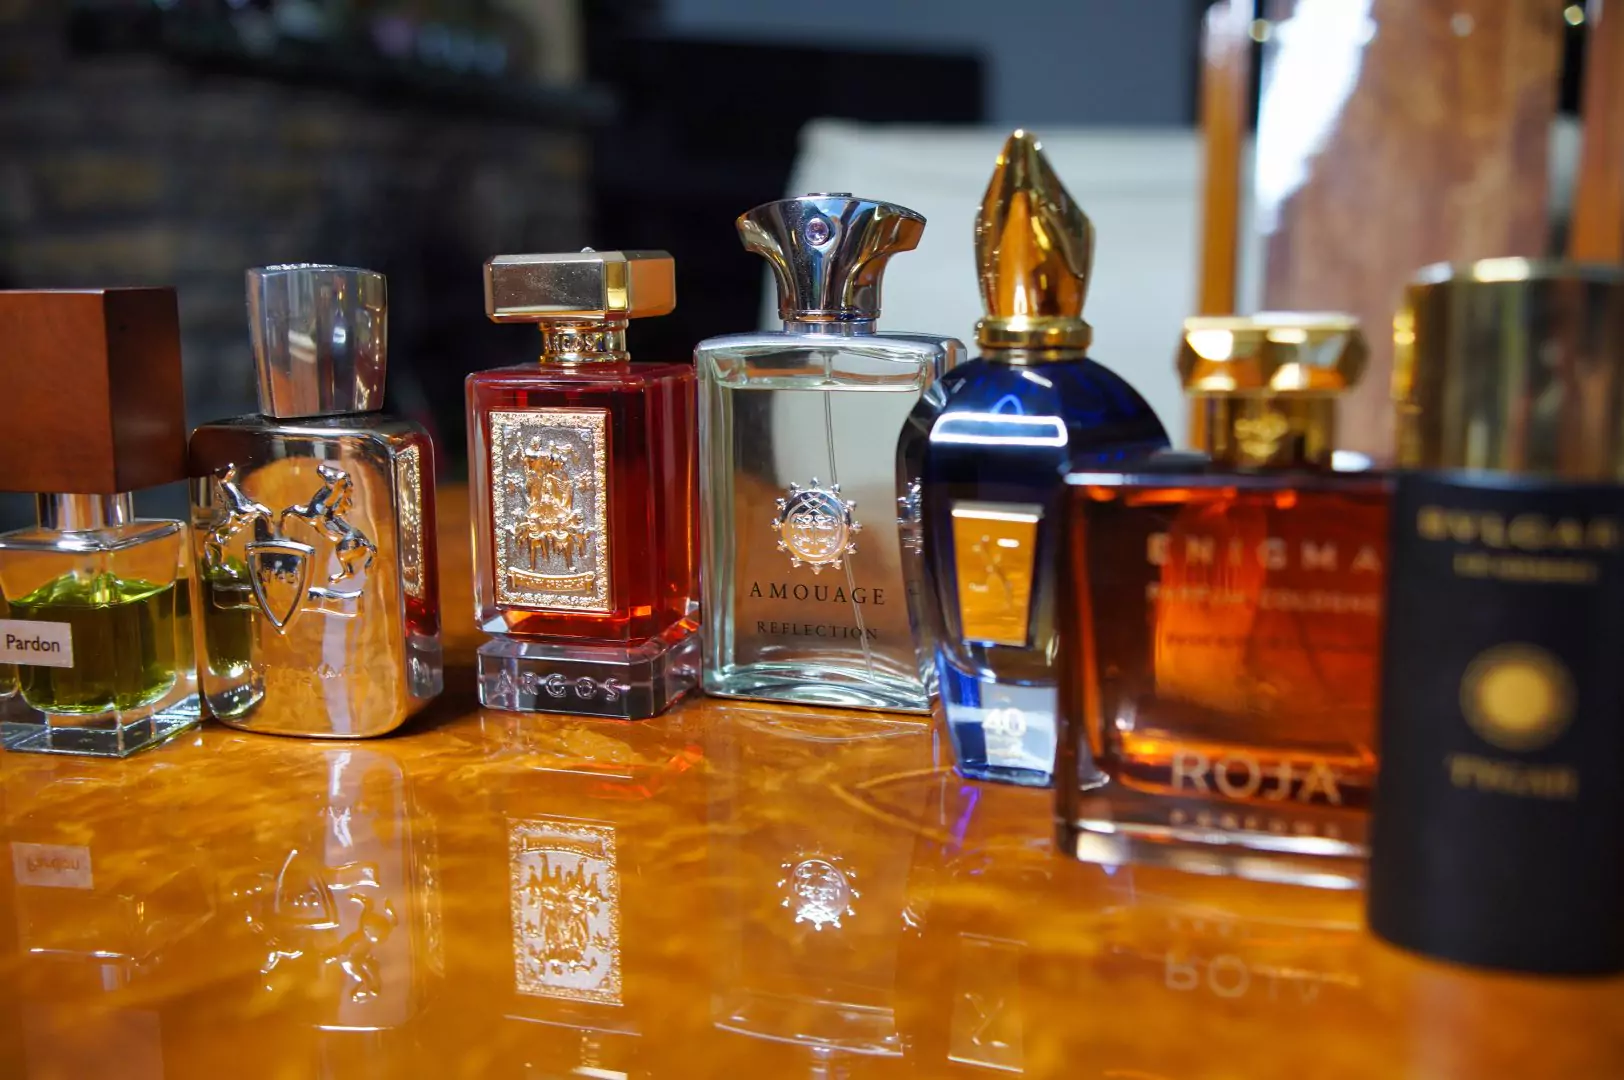 Some of my very expensive fragrances